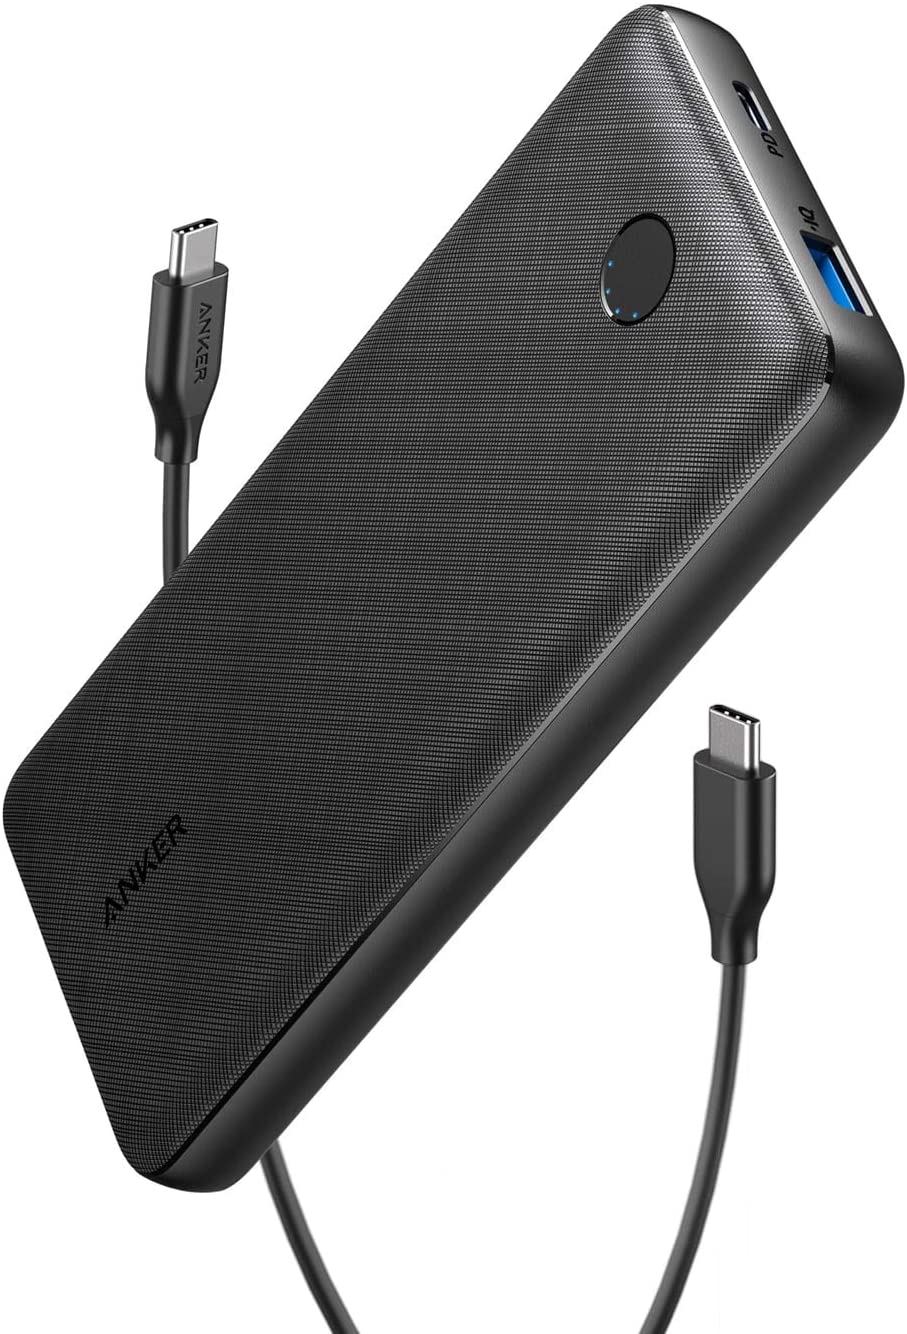 Anker Powercore Essential 20000mah PD Fast Charge Power bank 18W power bank, High Cell Capacity 20000mAh Portable Charger Battery Pack for 12/Mini/Pro/Max Pro/11/X, Samsung) best price in Kenya - DealBora